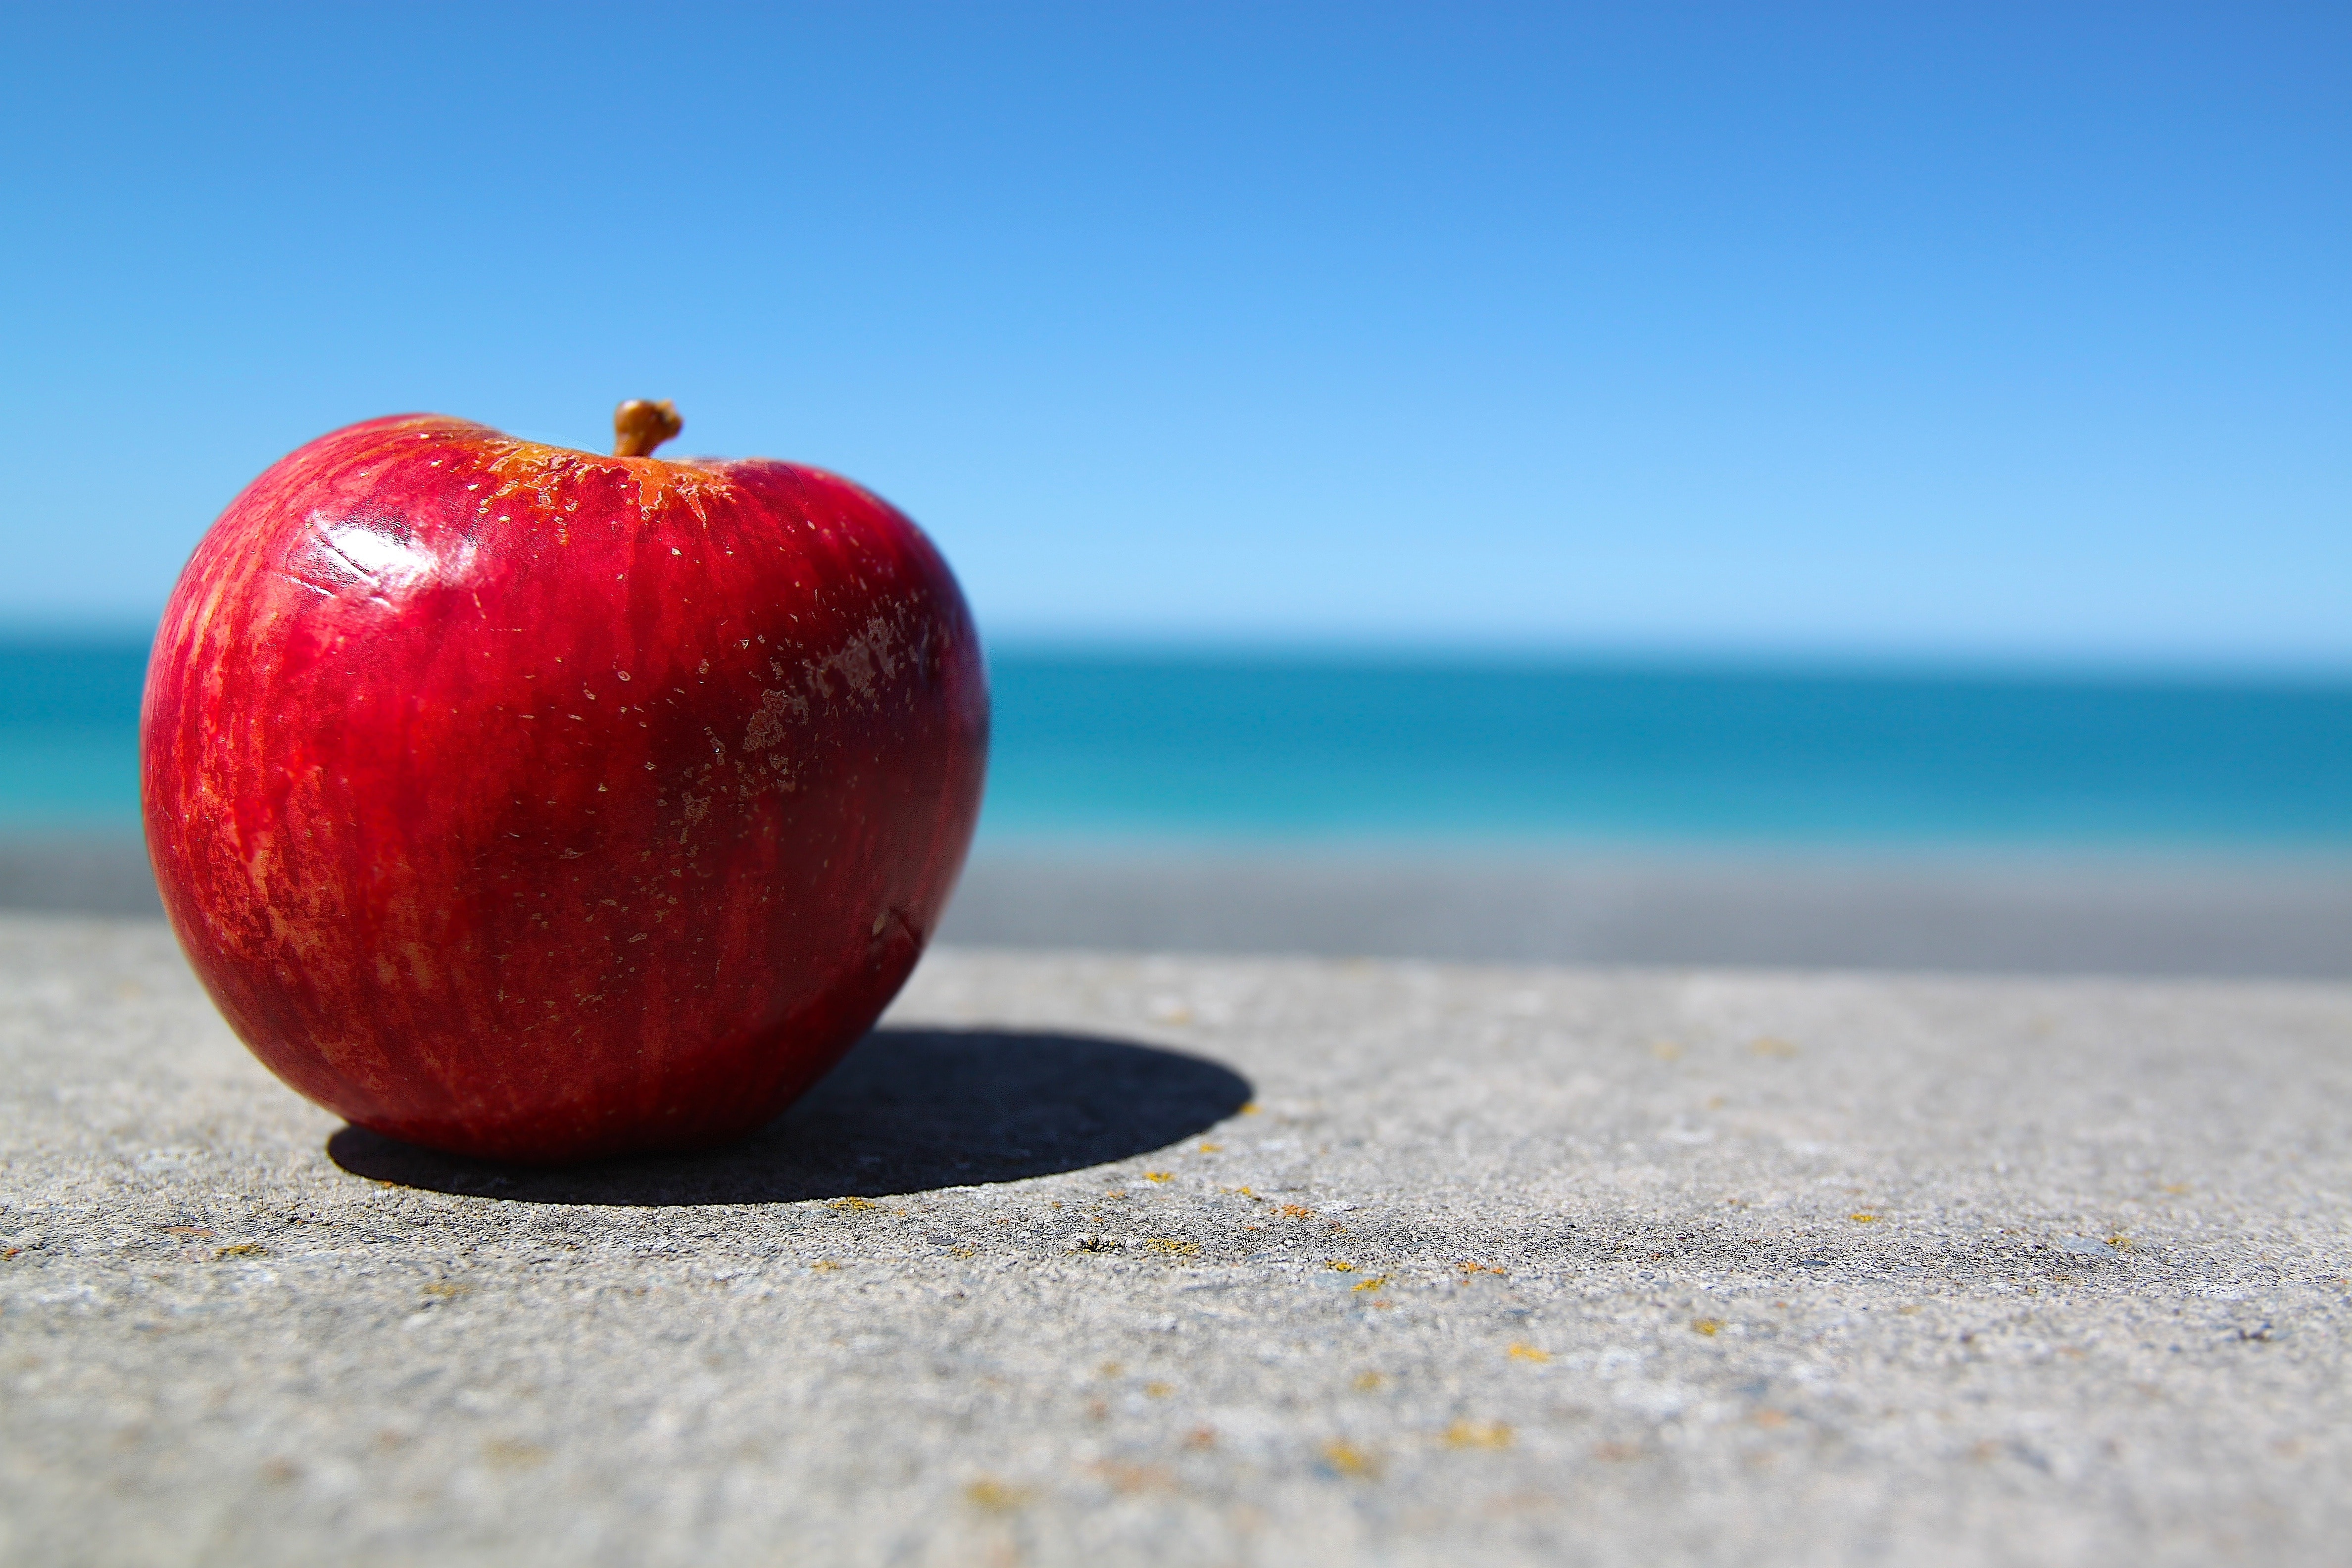 red apple fruit on gray sand under cloudy sky during daytime